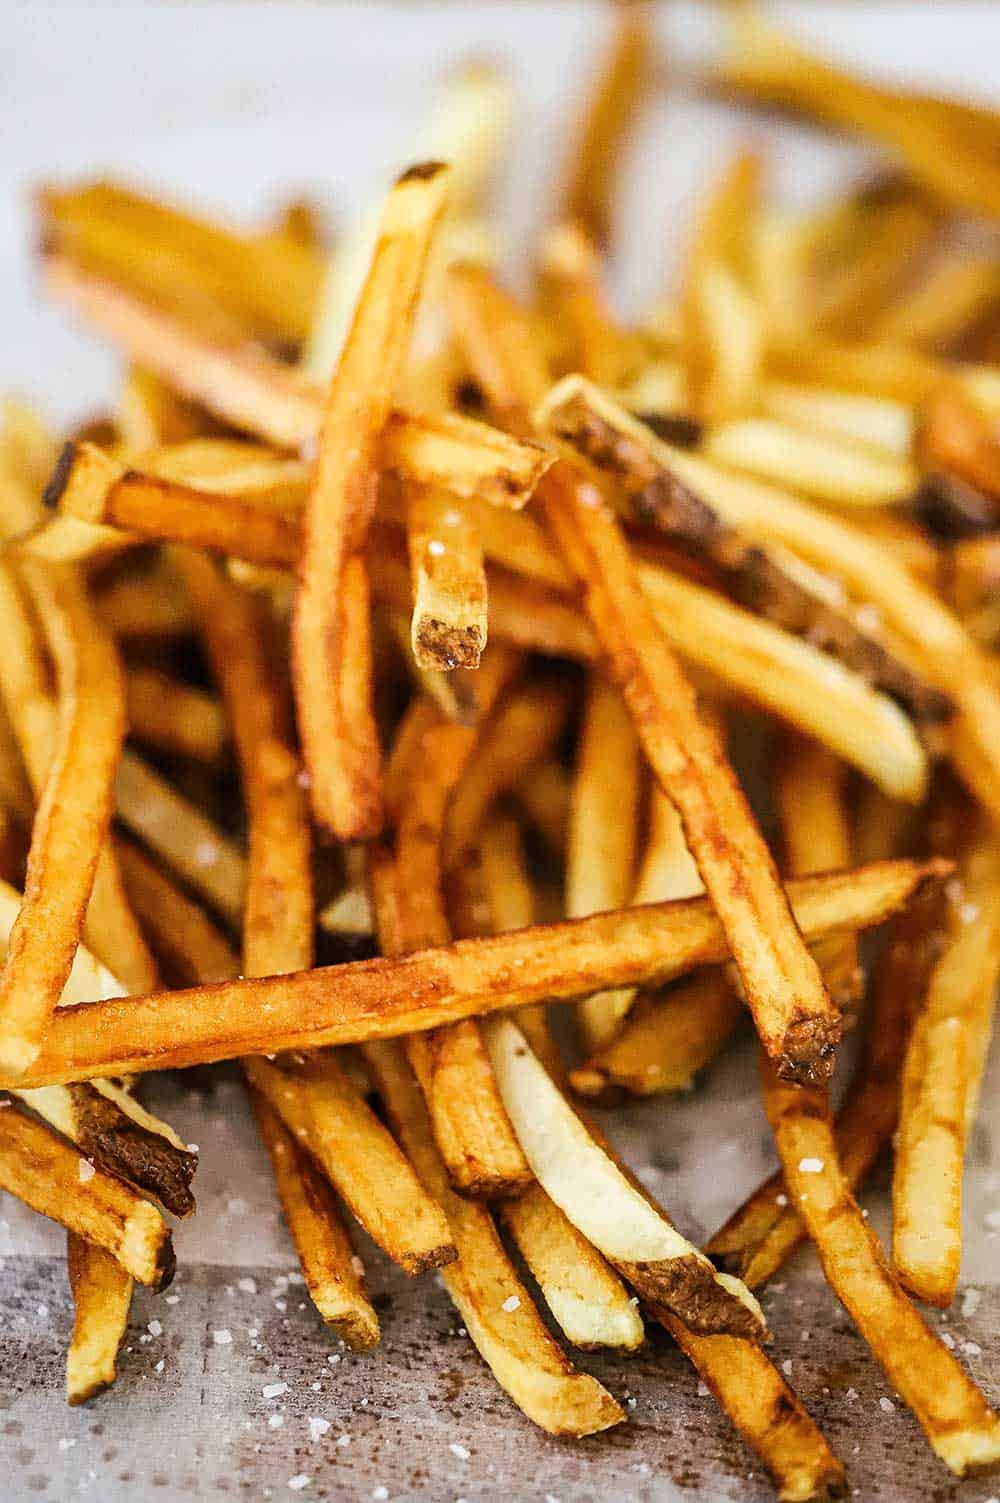 A pile of freshly made french fries sitting on paper towels and sprinkled with coarse salt.